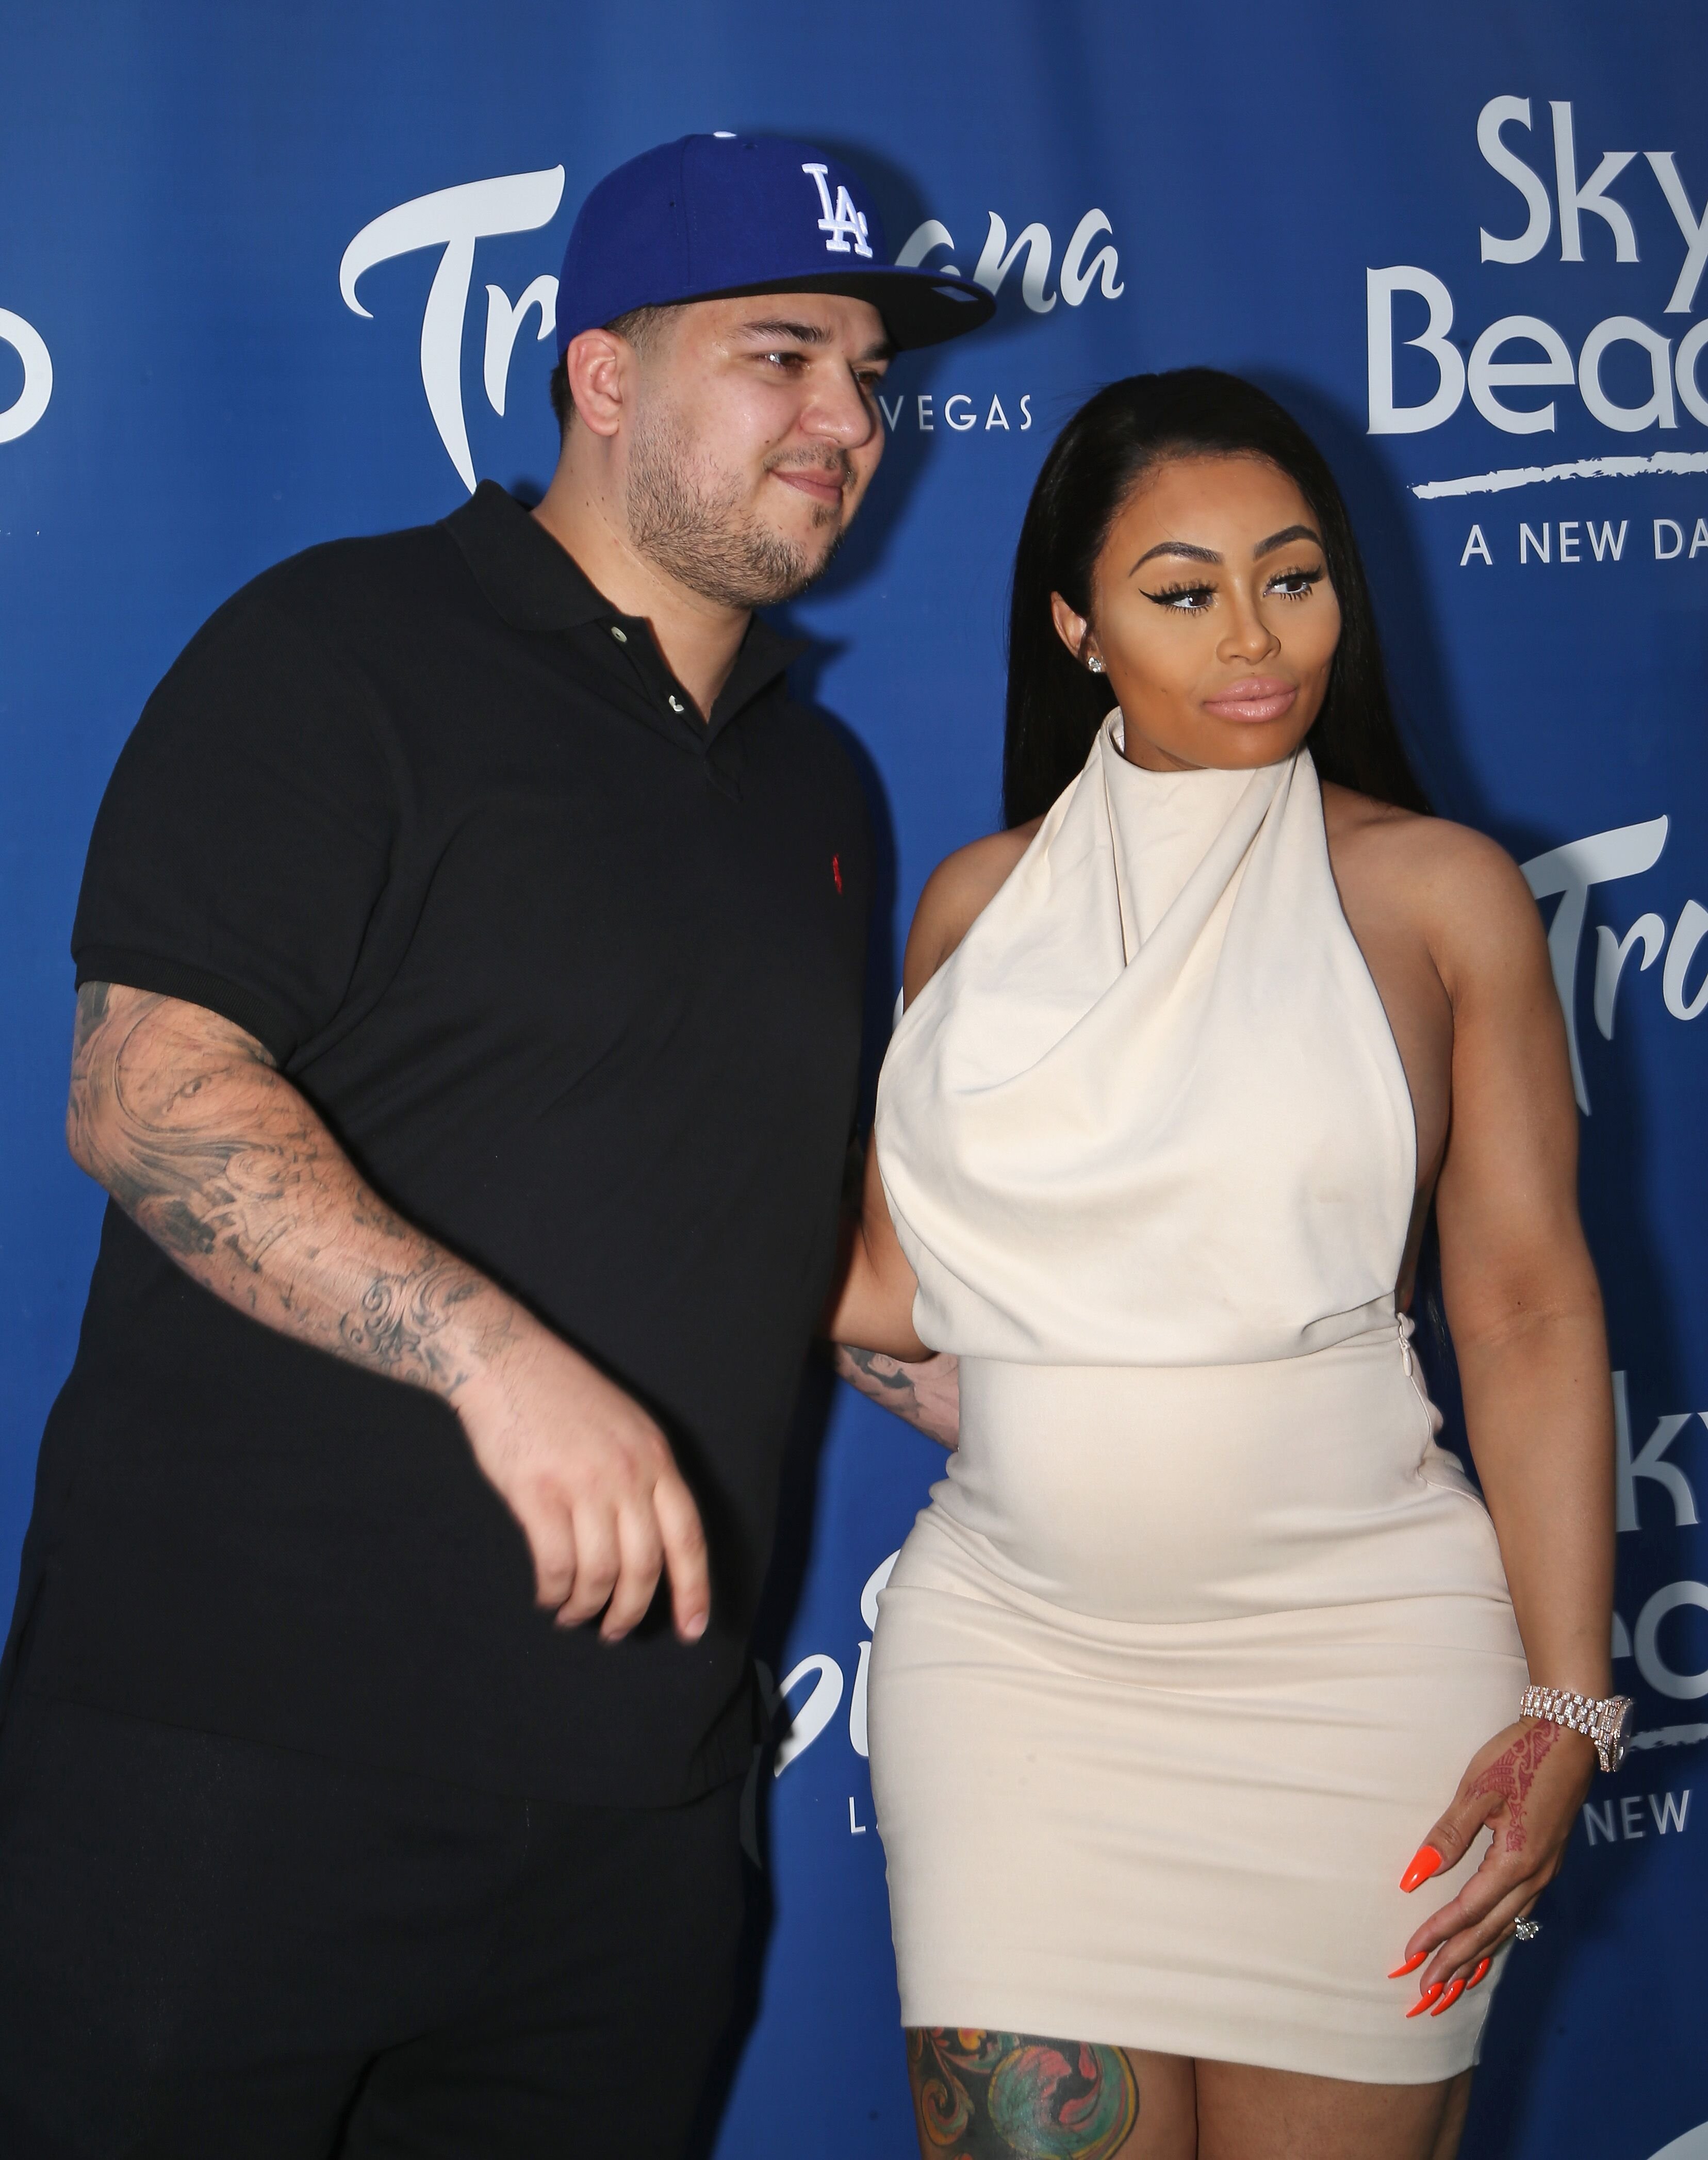  Television personality Rob Kardashian (L) and model Blac Chyna attend the Sky Beach Club at the Tropicana Las Vegas on May 28, 2016 in Las Vegas, Nevada | Photo: Getty Images